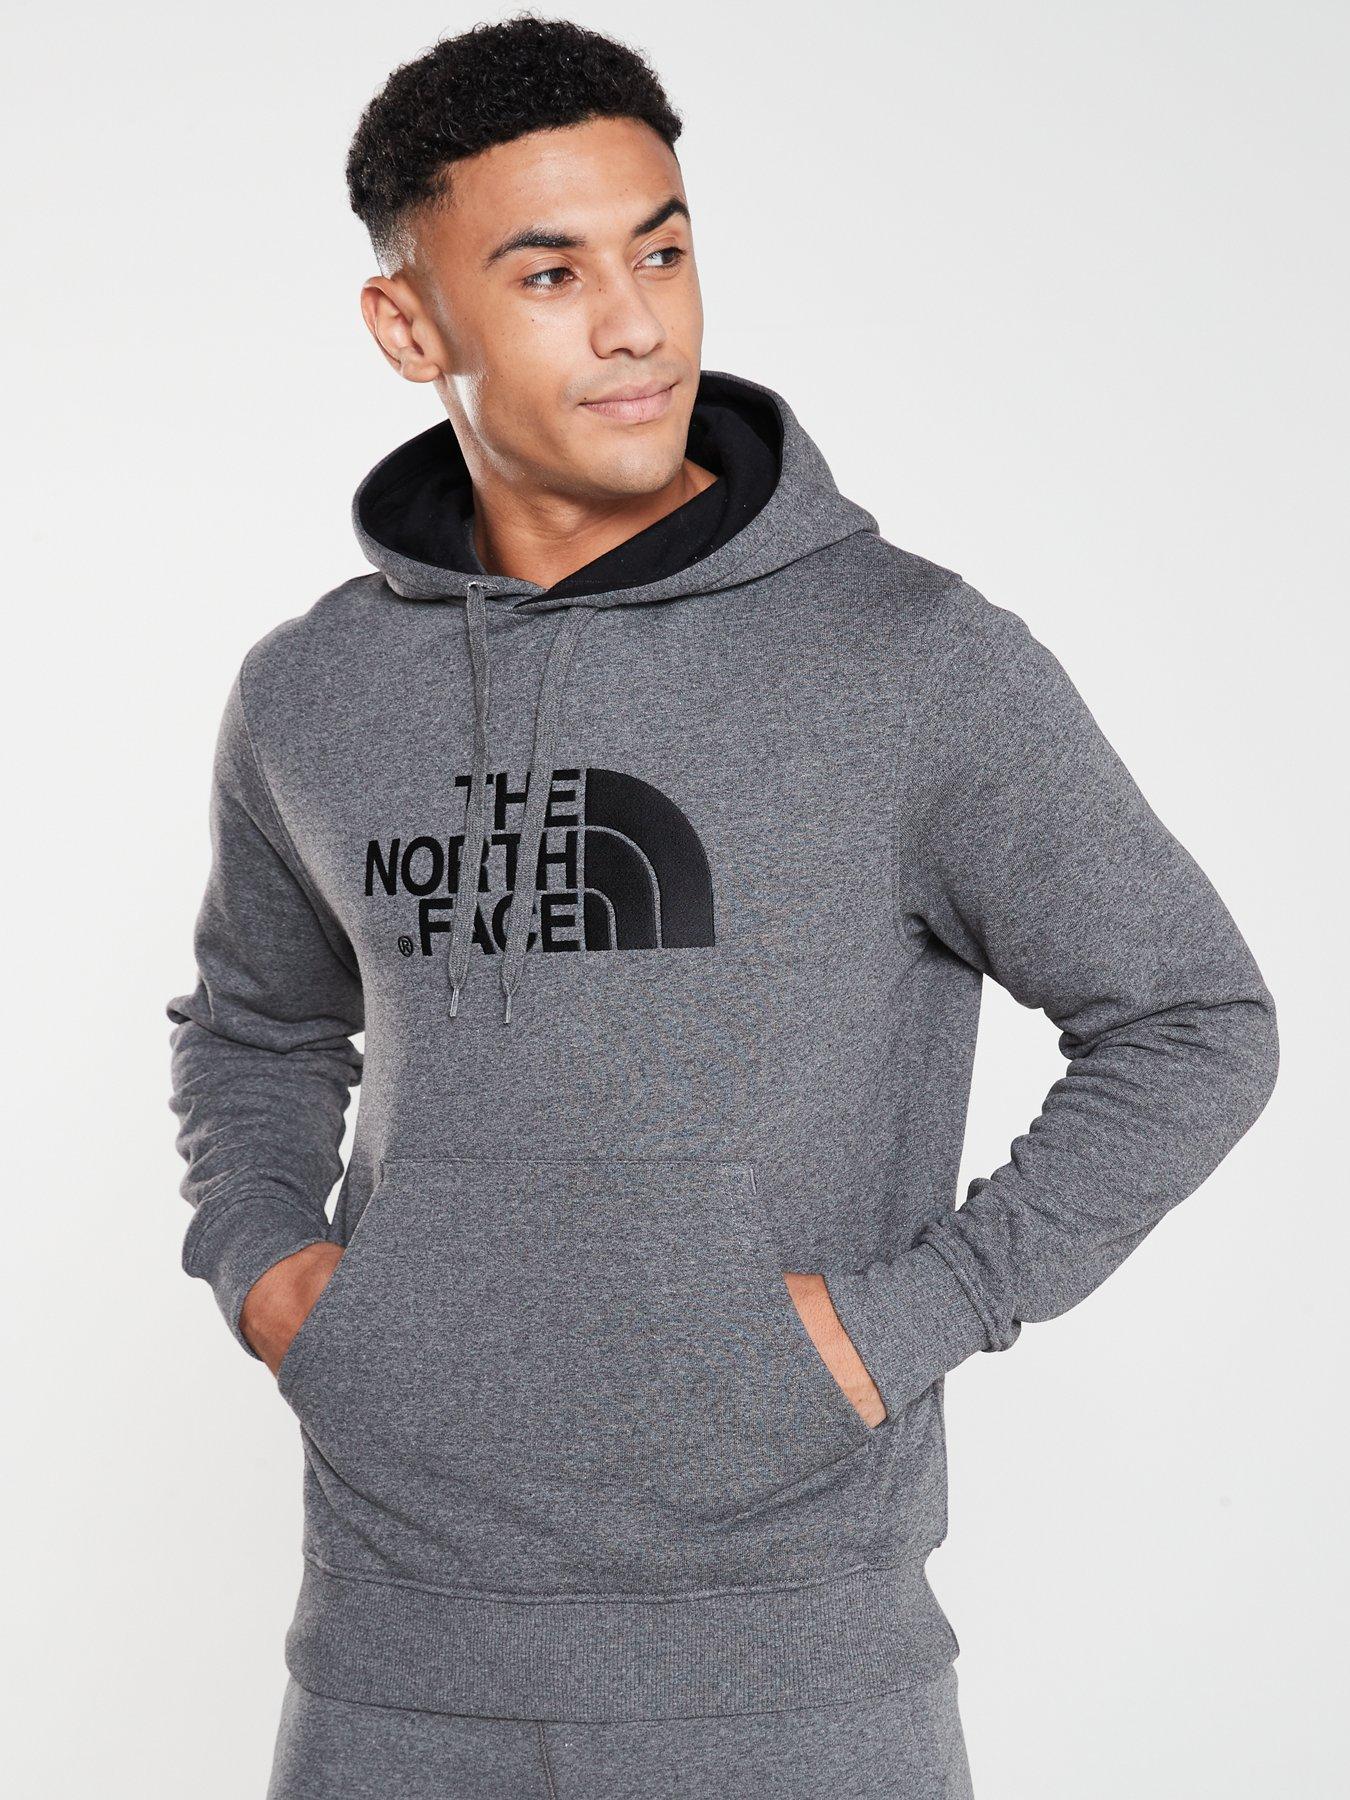 the north face tracksuit mens